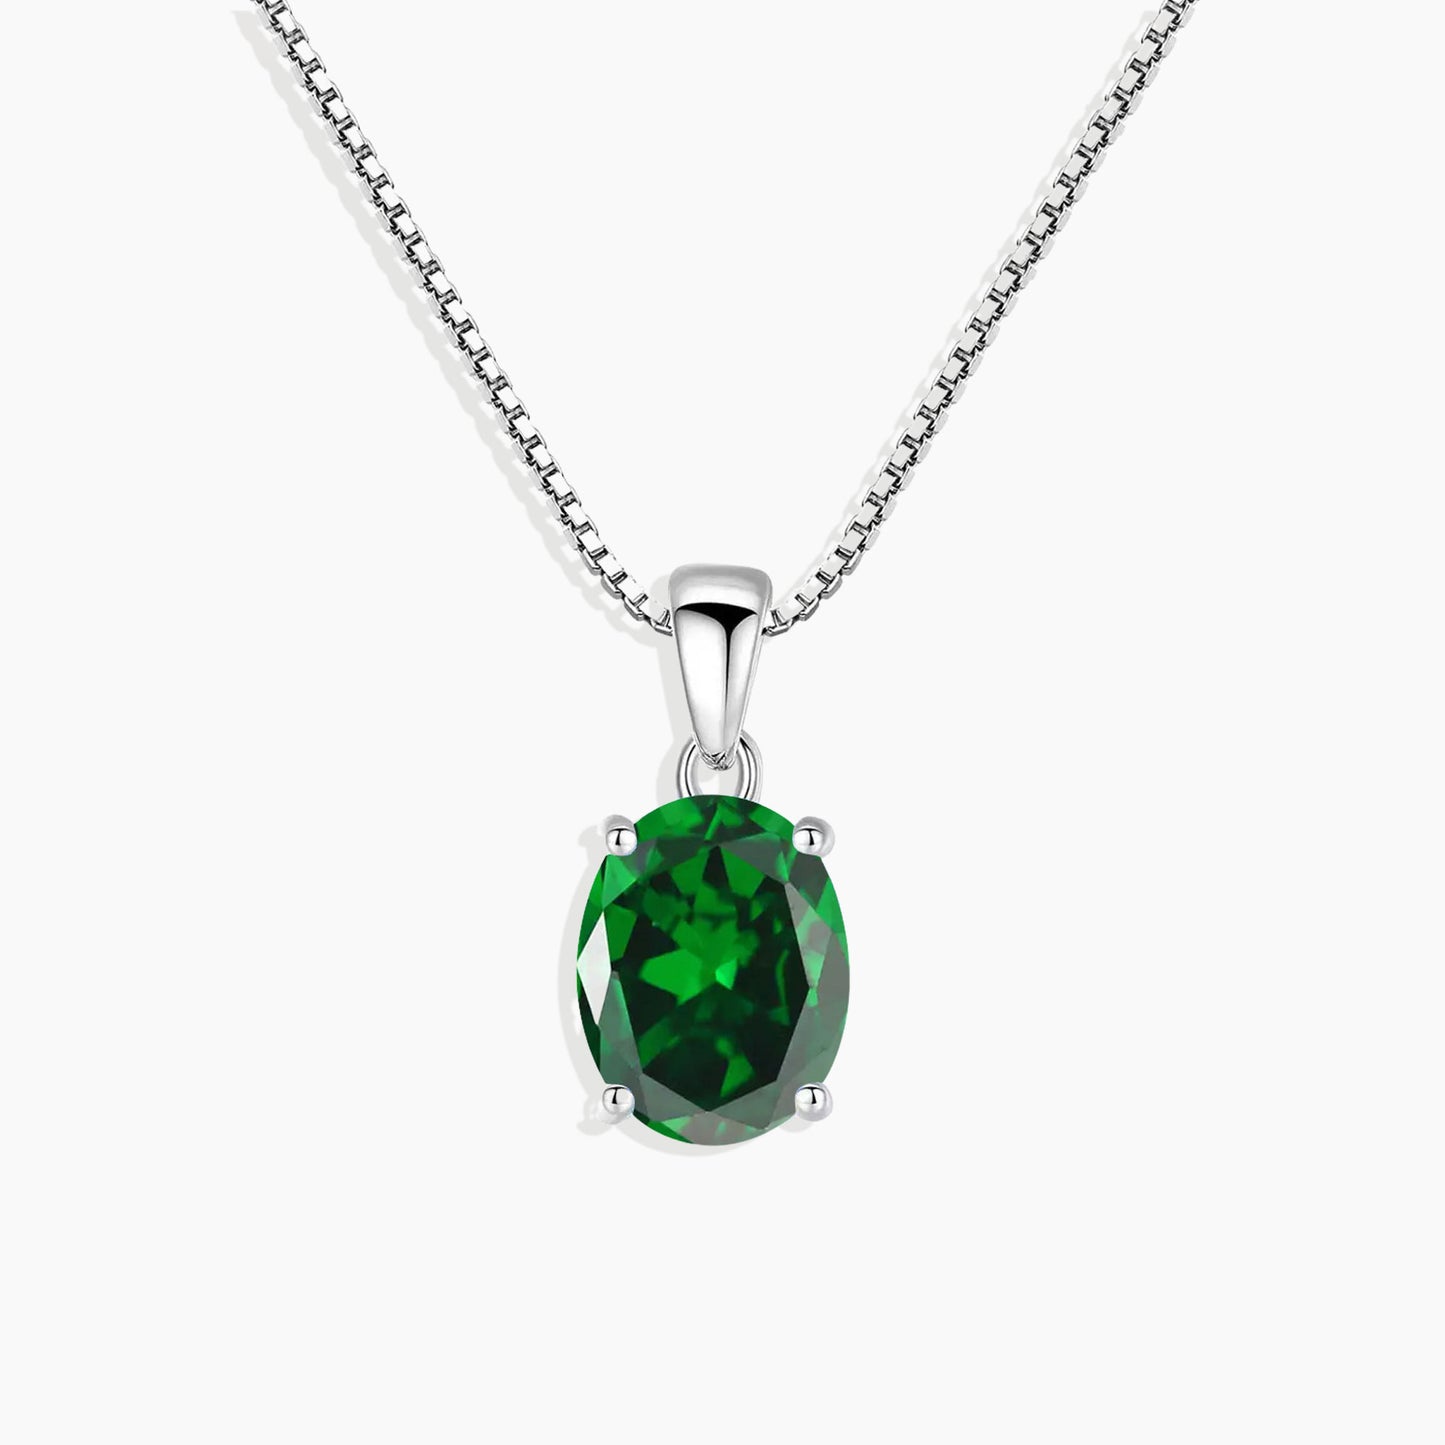 Irosk Oval Cut Necklace in Sterling Silver -  Emerald